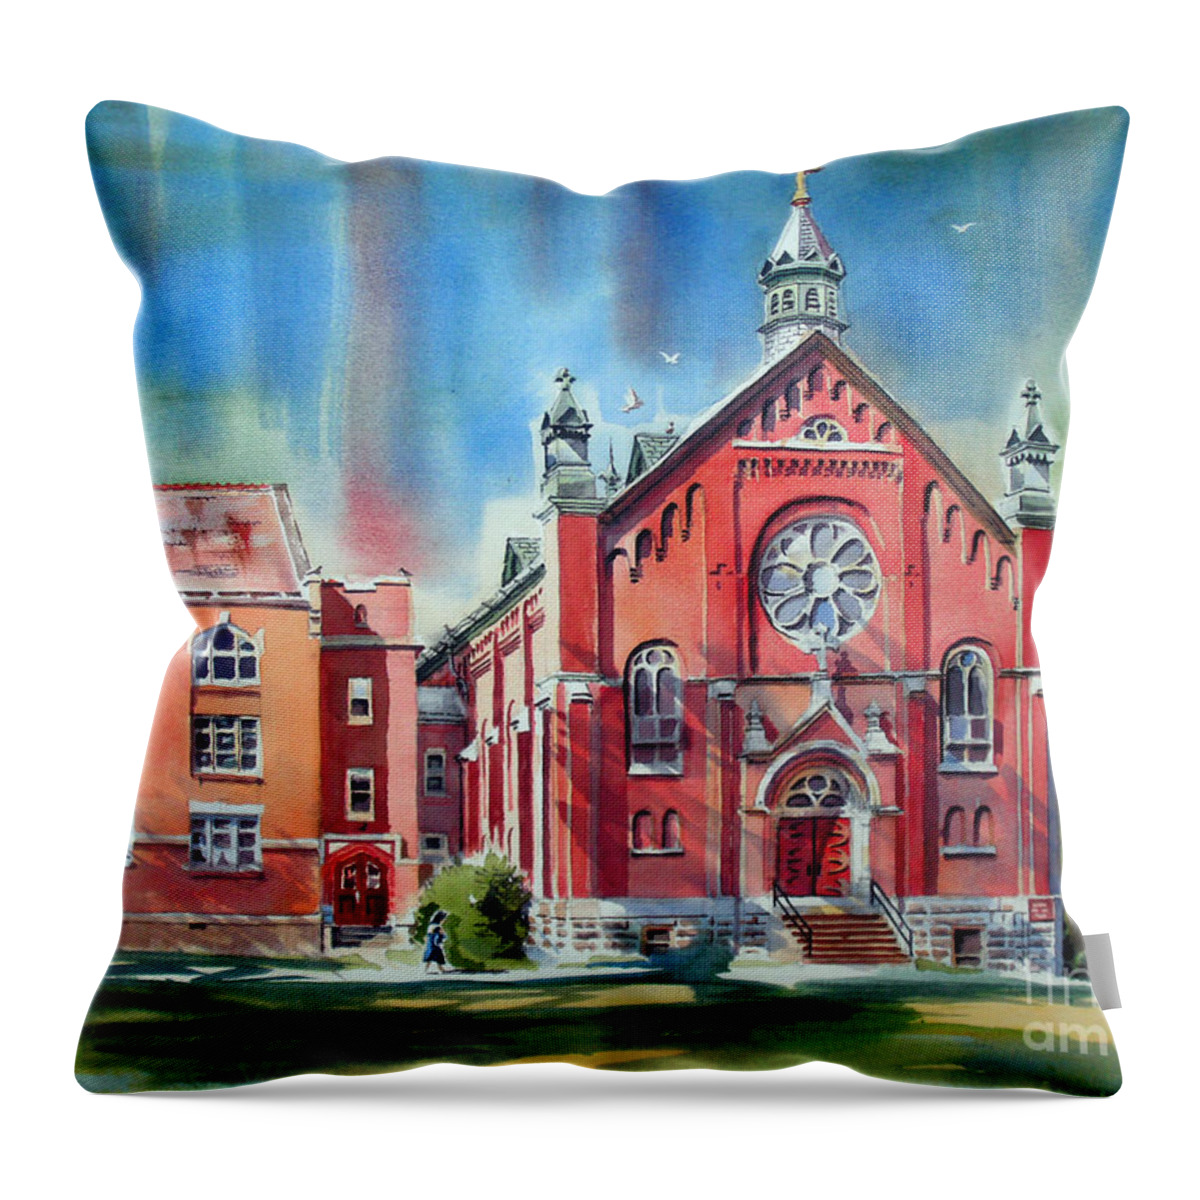 Feed The Birds Iii Throw Pillow featuring the painting Feed the Birds III by Kip DeVore